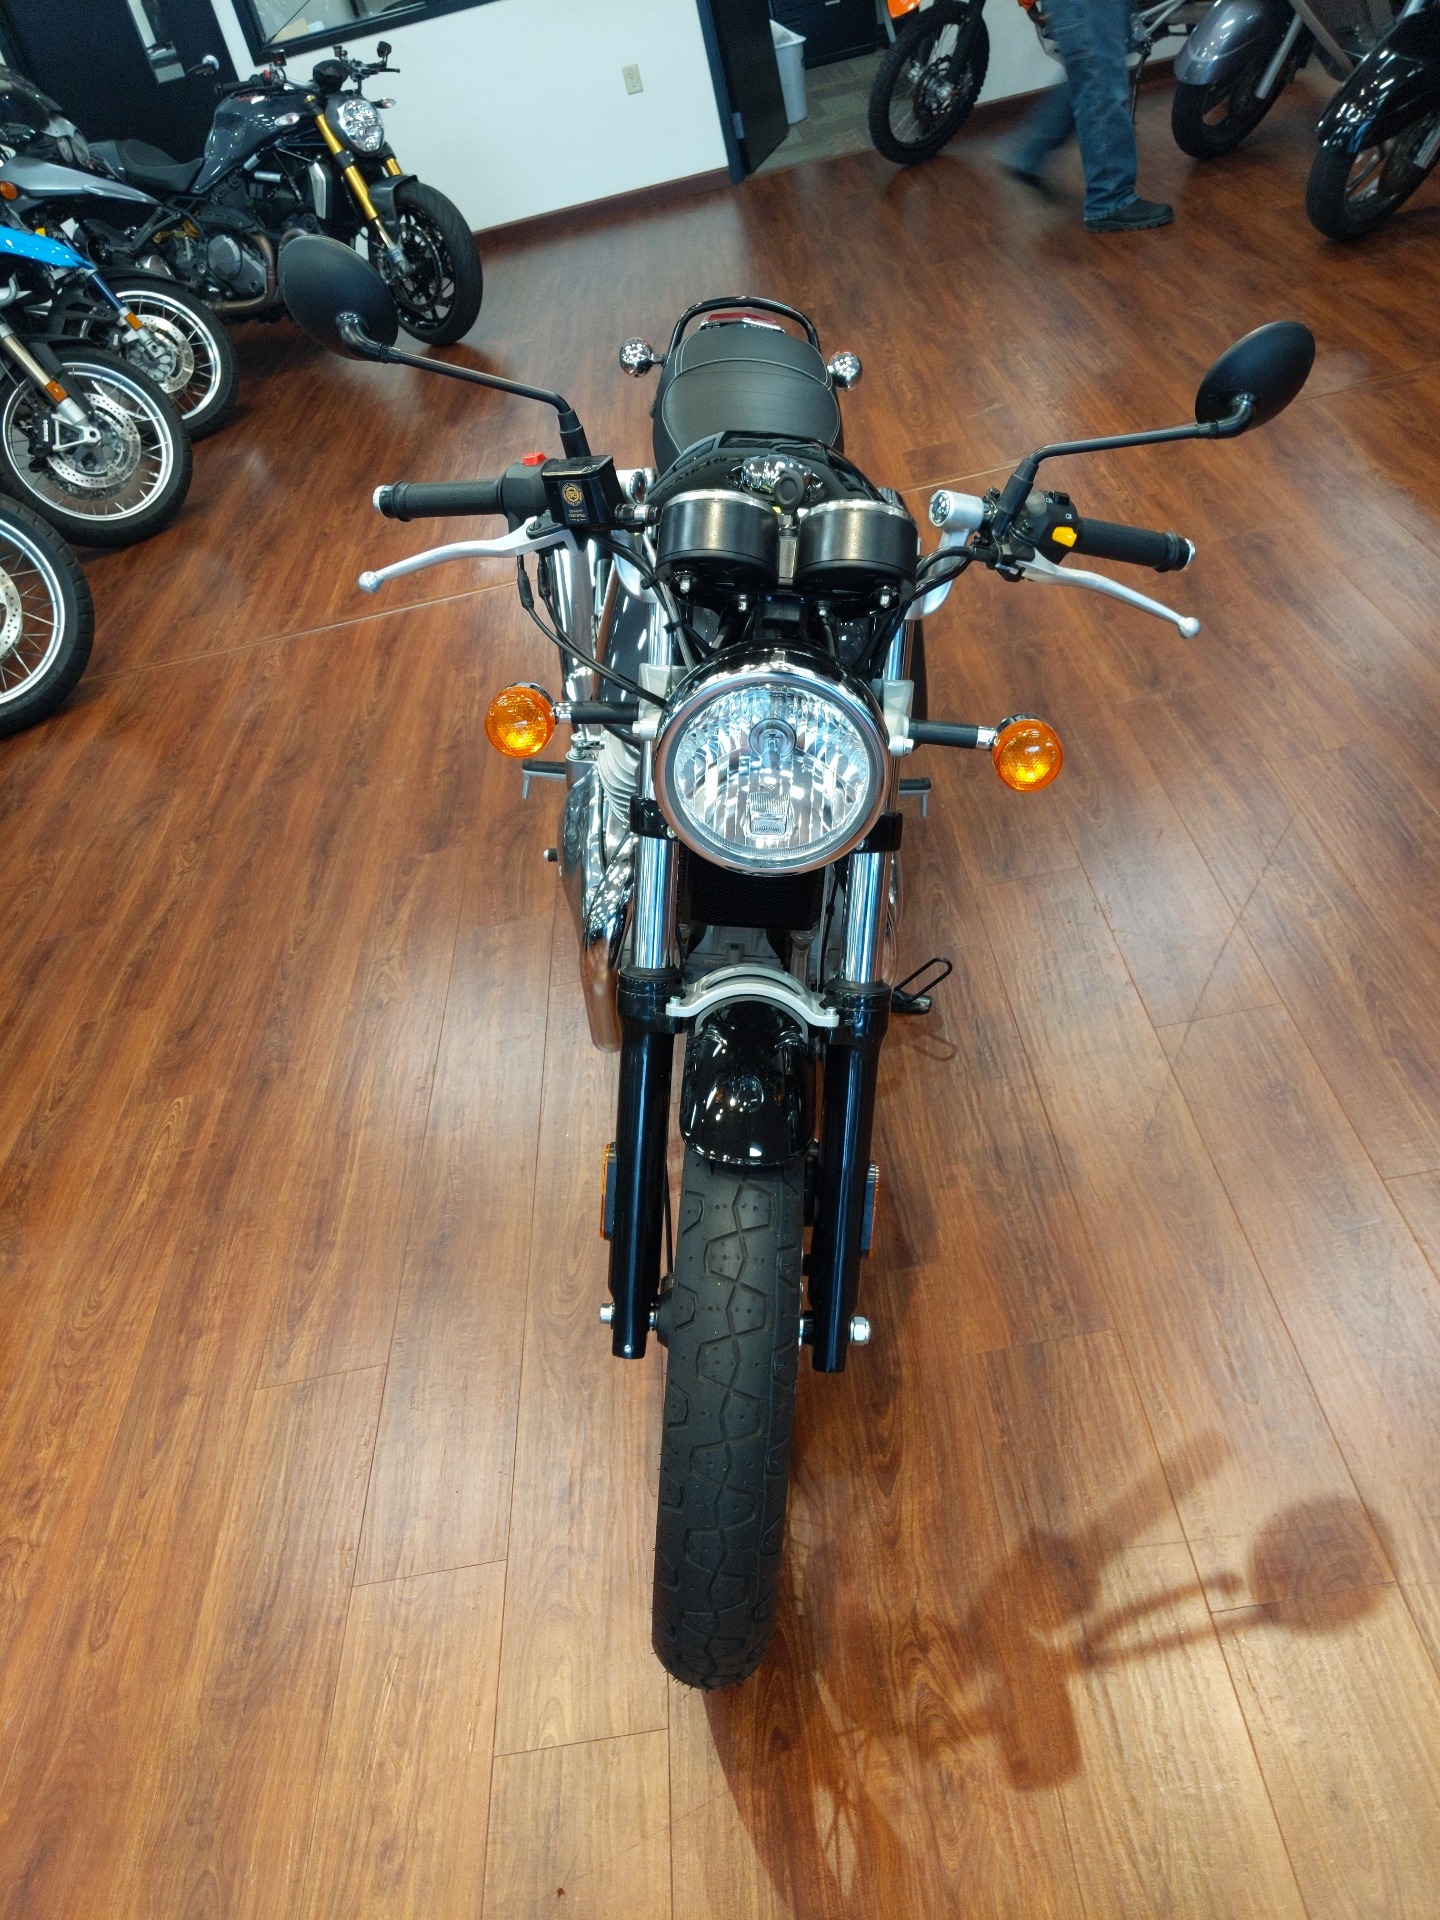 2021 Royal Enfield Continental GT 650 in De Pere, Wisconsin - Photo 3